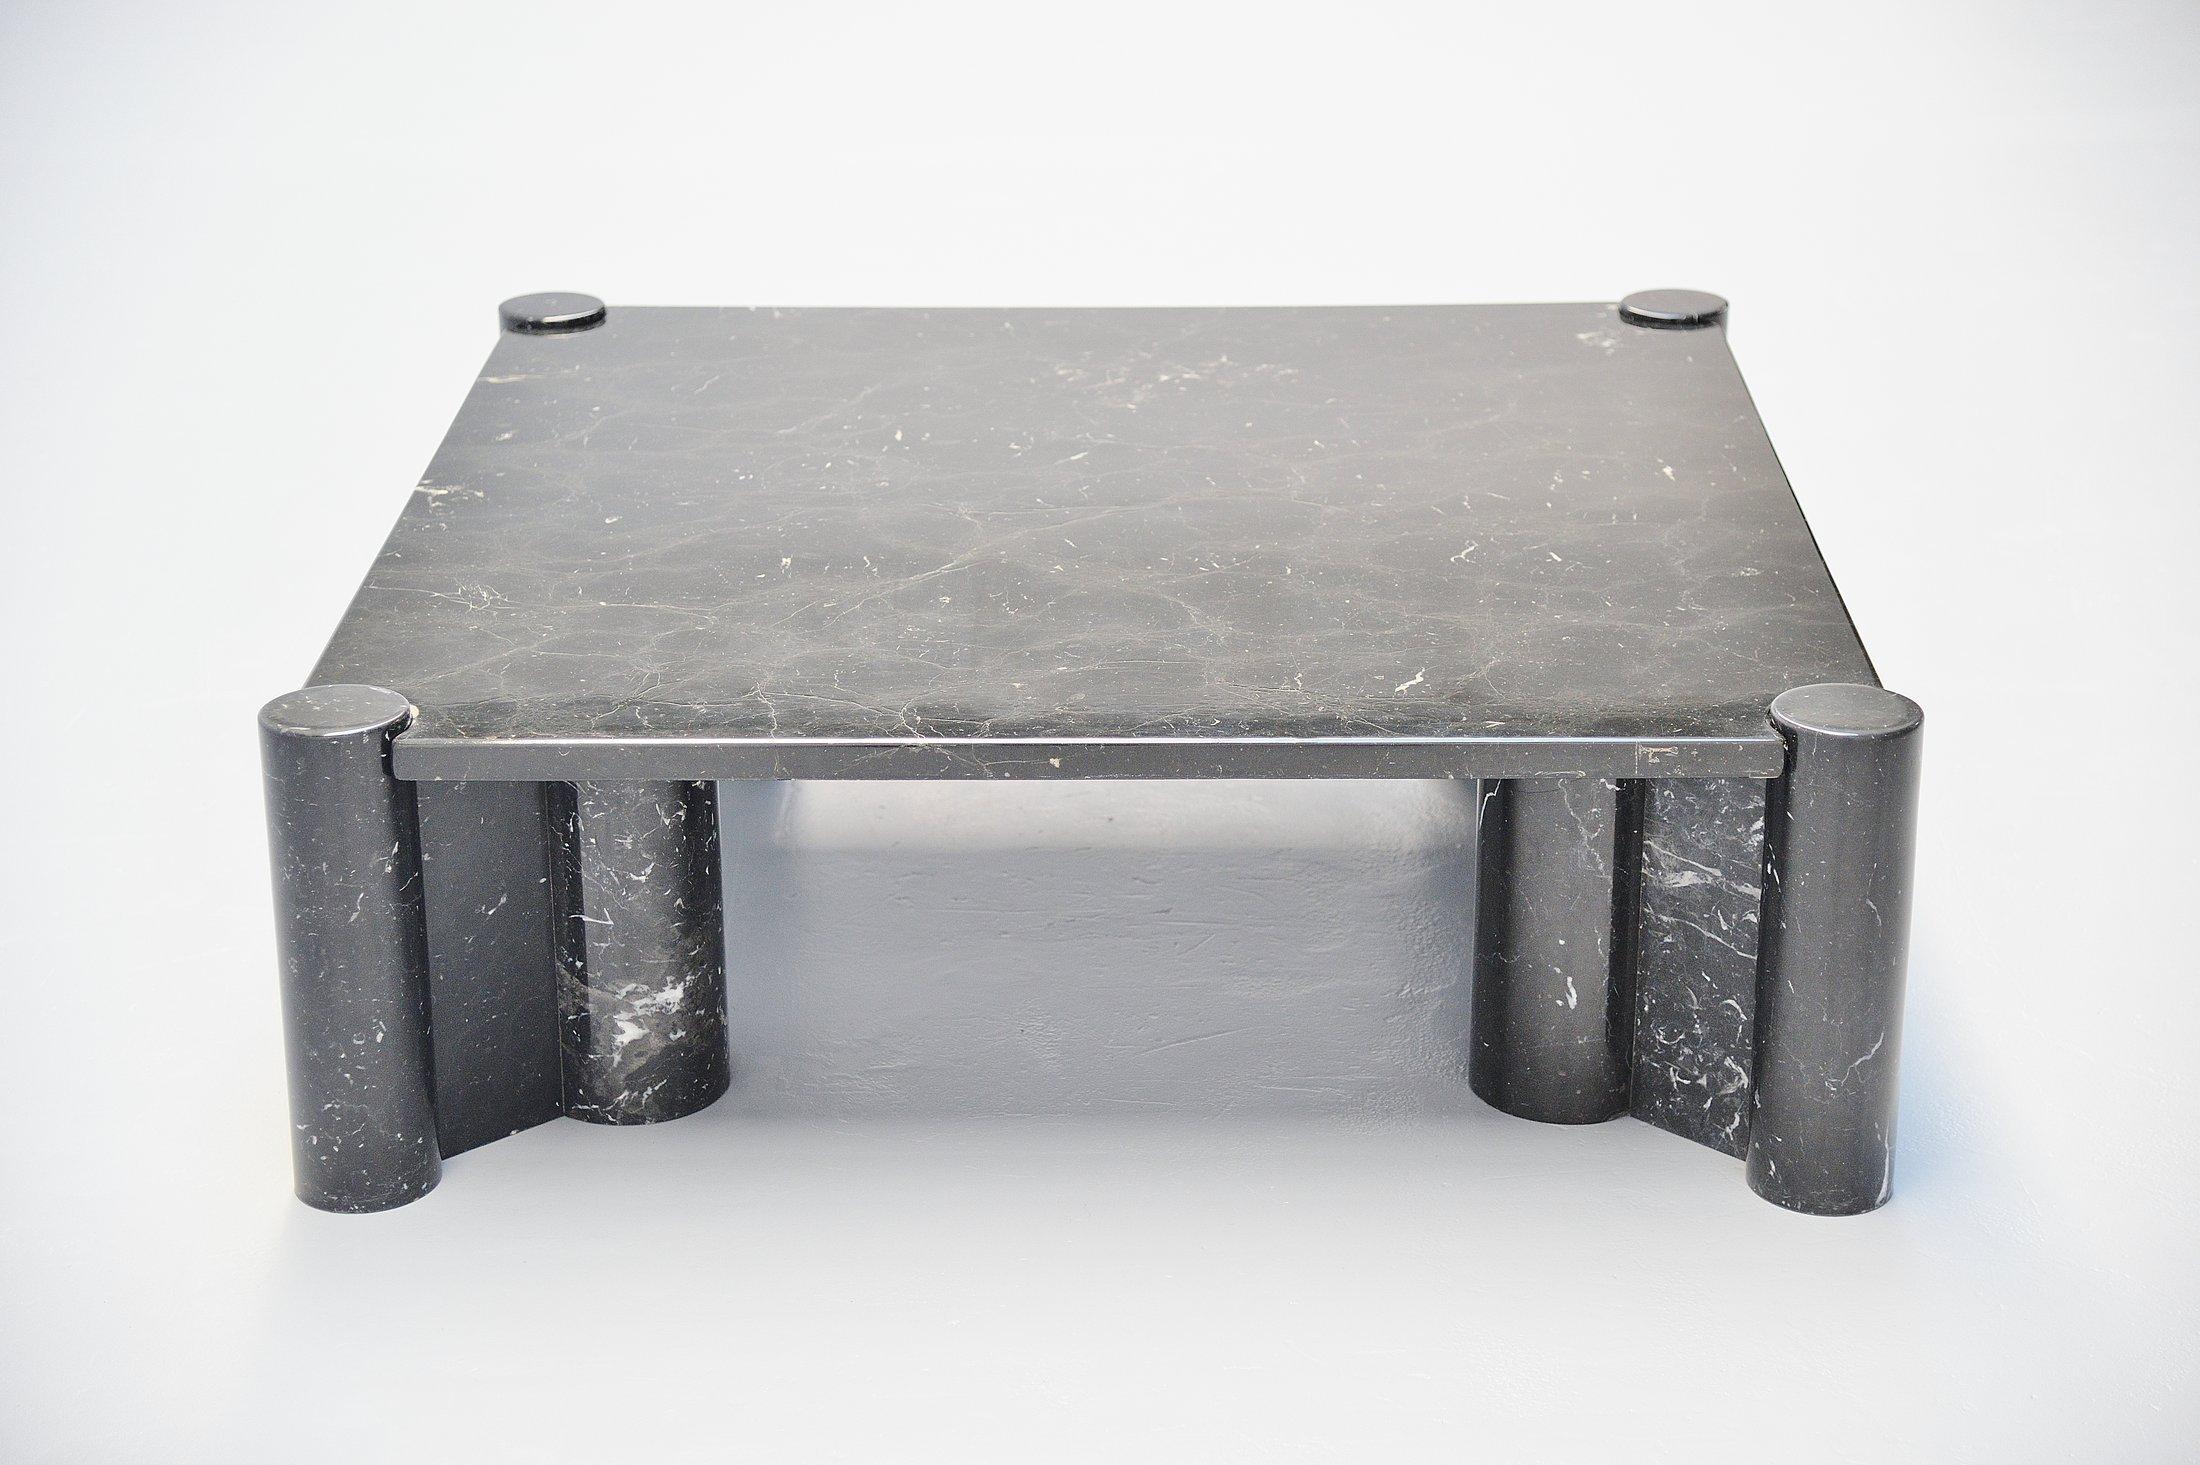 Stunning and early edition 'Jumbo' coffee table designed by Gae Aulenti and manufactured by Knoll International, Italy, 1965. This example was made in stunning black marquina marble with white veins. The table is in very good original condition